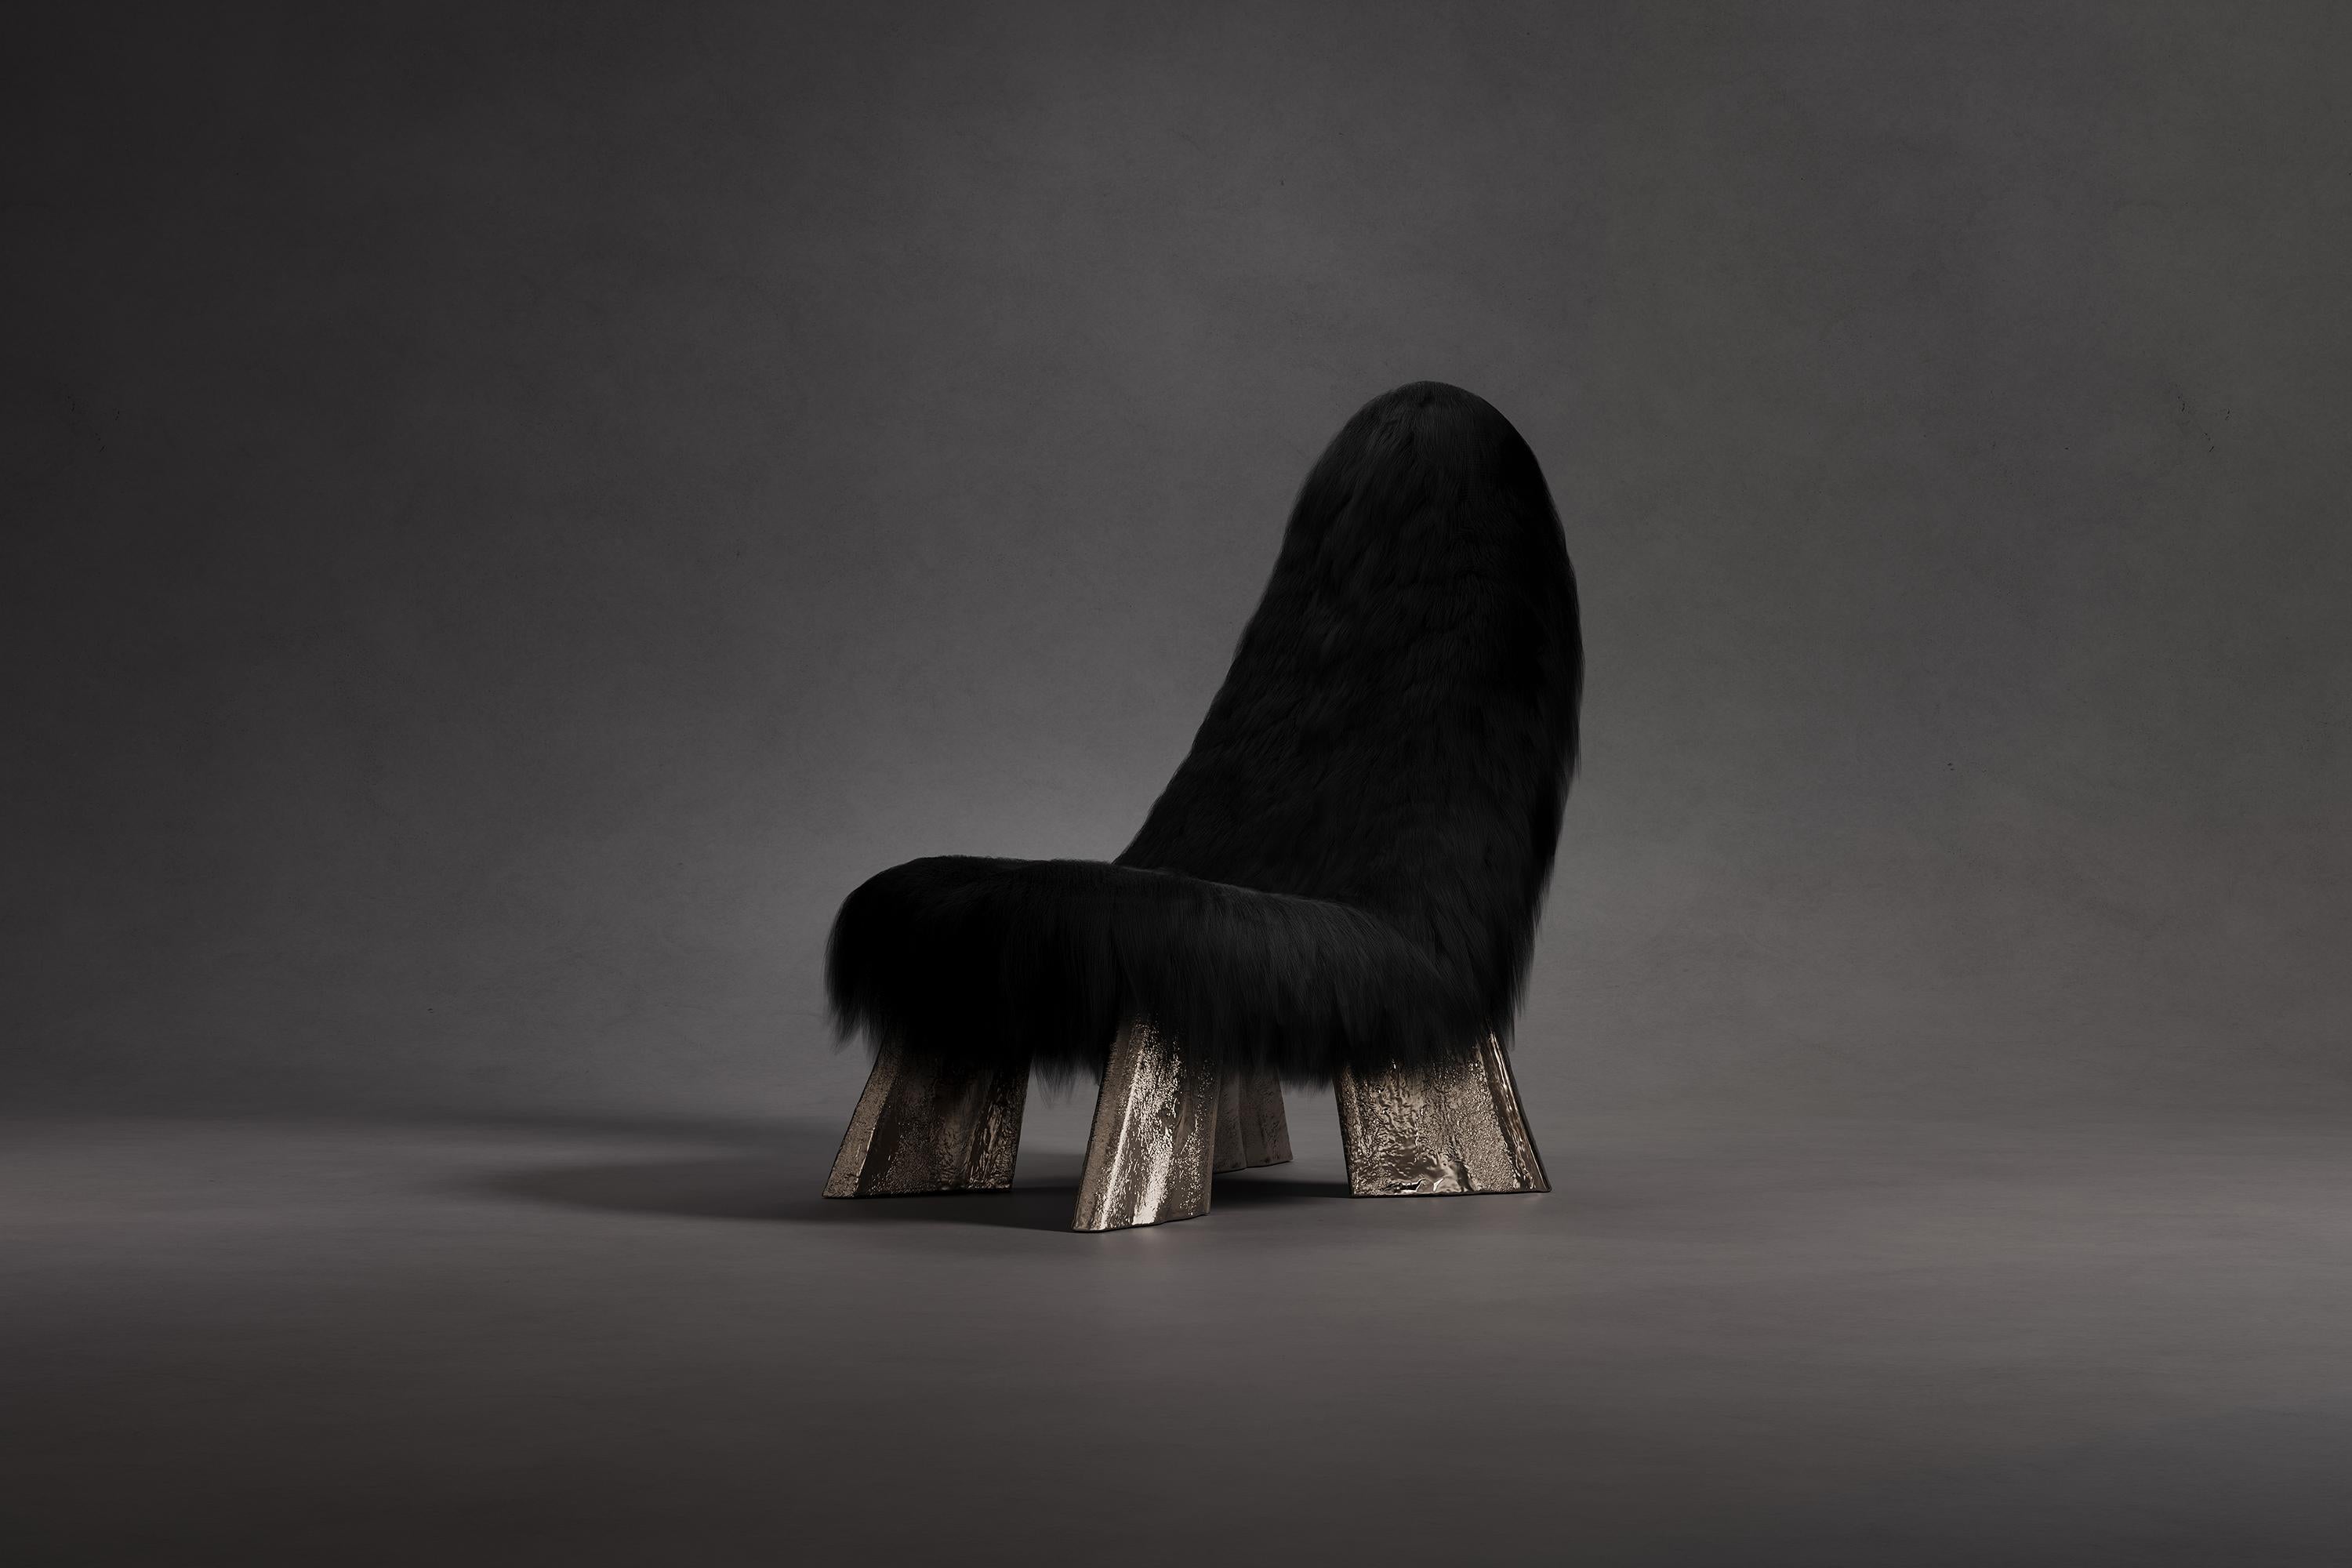 Chaos Chair by Atelier V&F
Limited Edition Of 24+2AP Pieces.
Dimensions: D 95 x W 70 x H 110 cm. 
Materials: Goatskin offcuts and cast brass.

「Chaos Chair」descends infinitely closer to the ground, solidly and steadily, like a steep hill or a ready